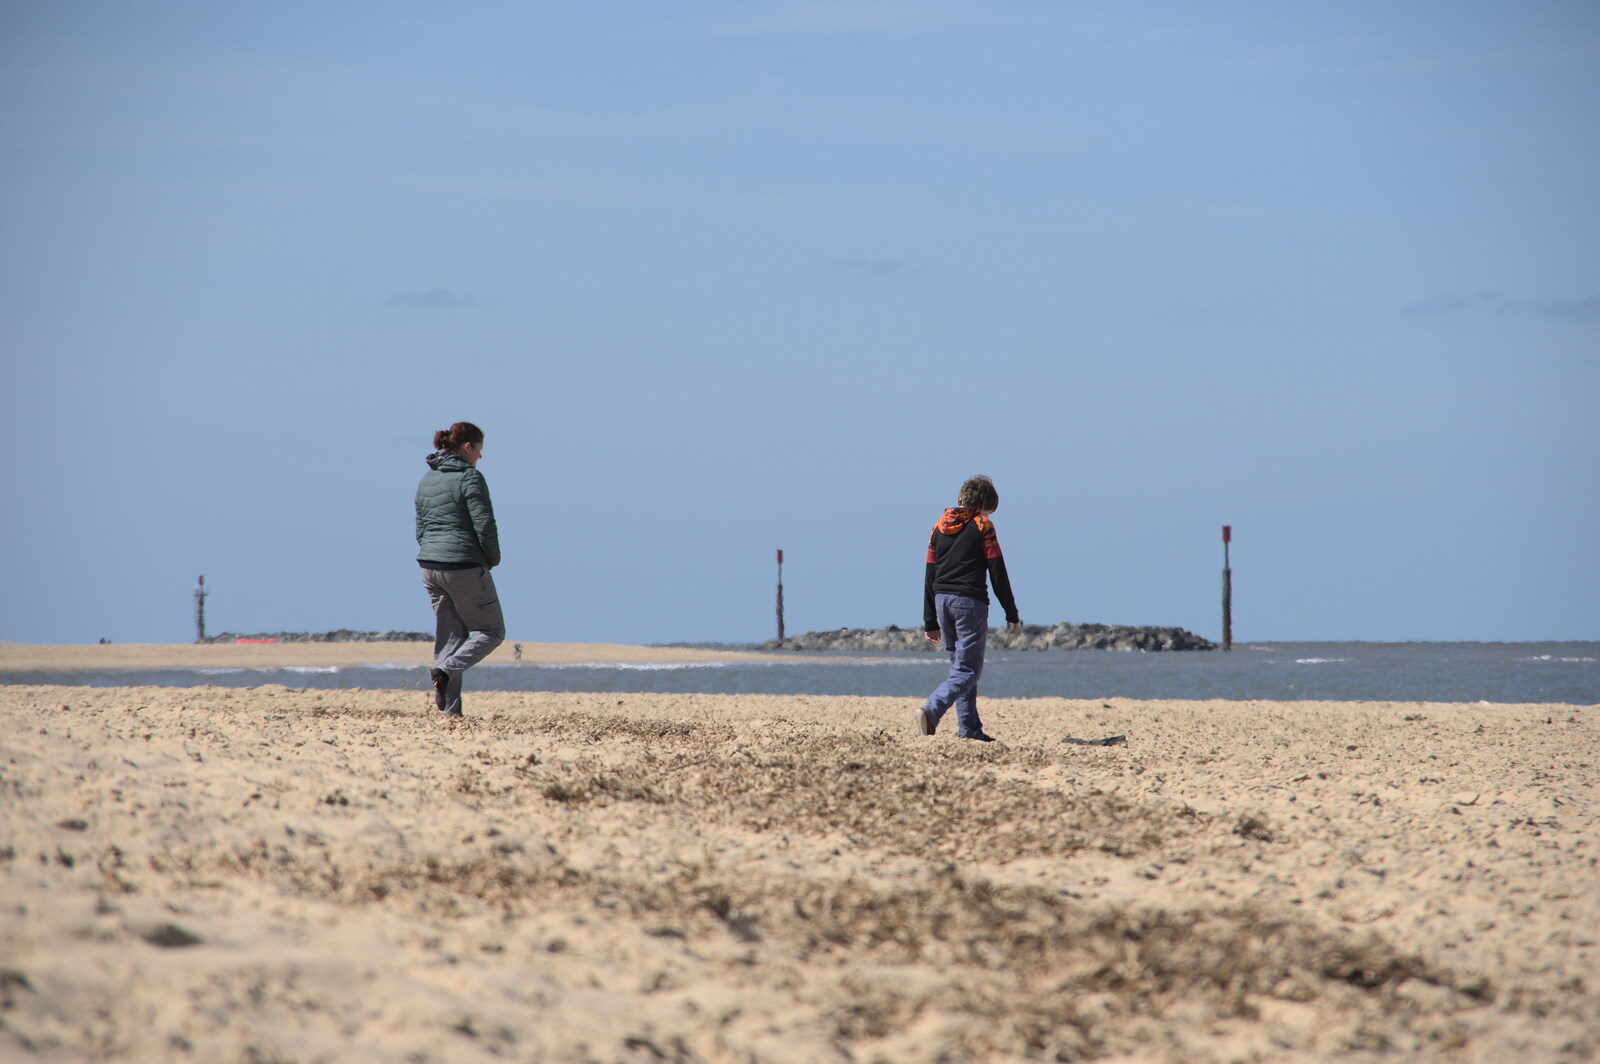 Isobel and Fred wander off for a walk from On the Beach at Sea Palling, Norfolk - 8th May 2022